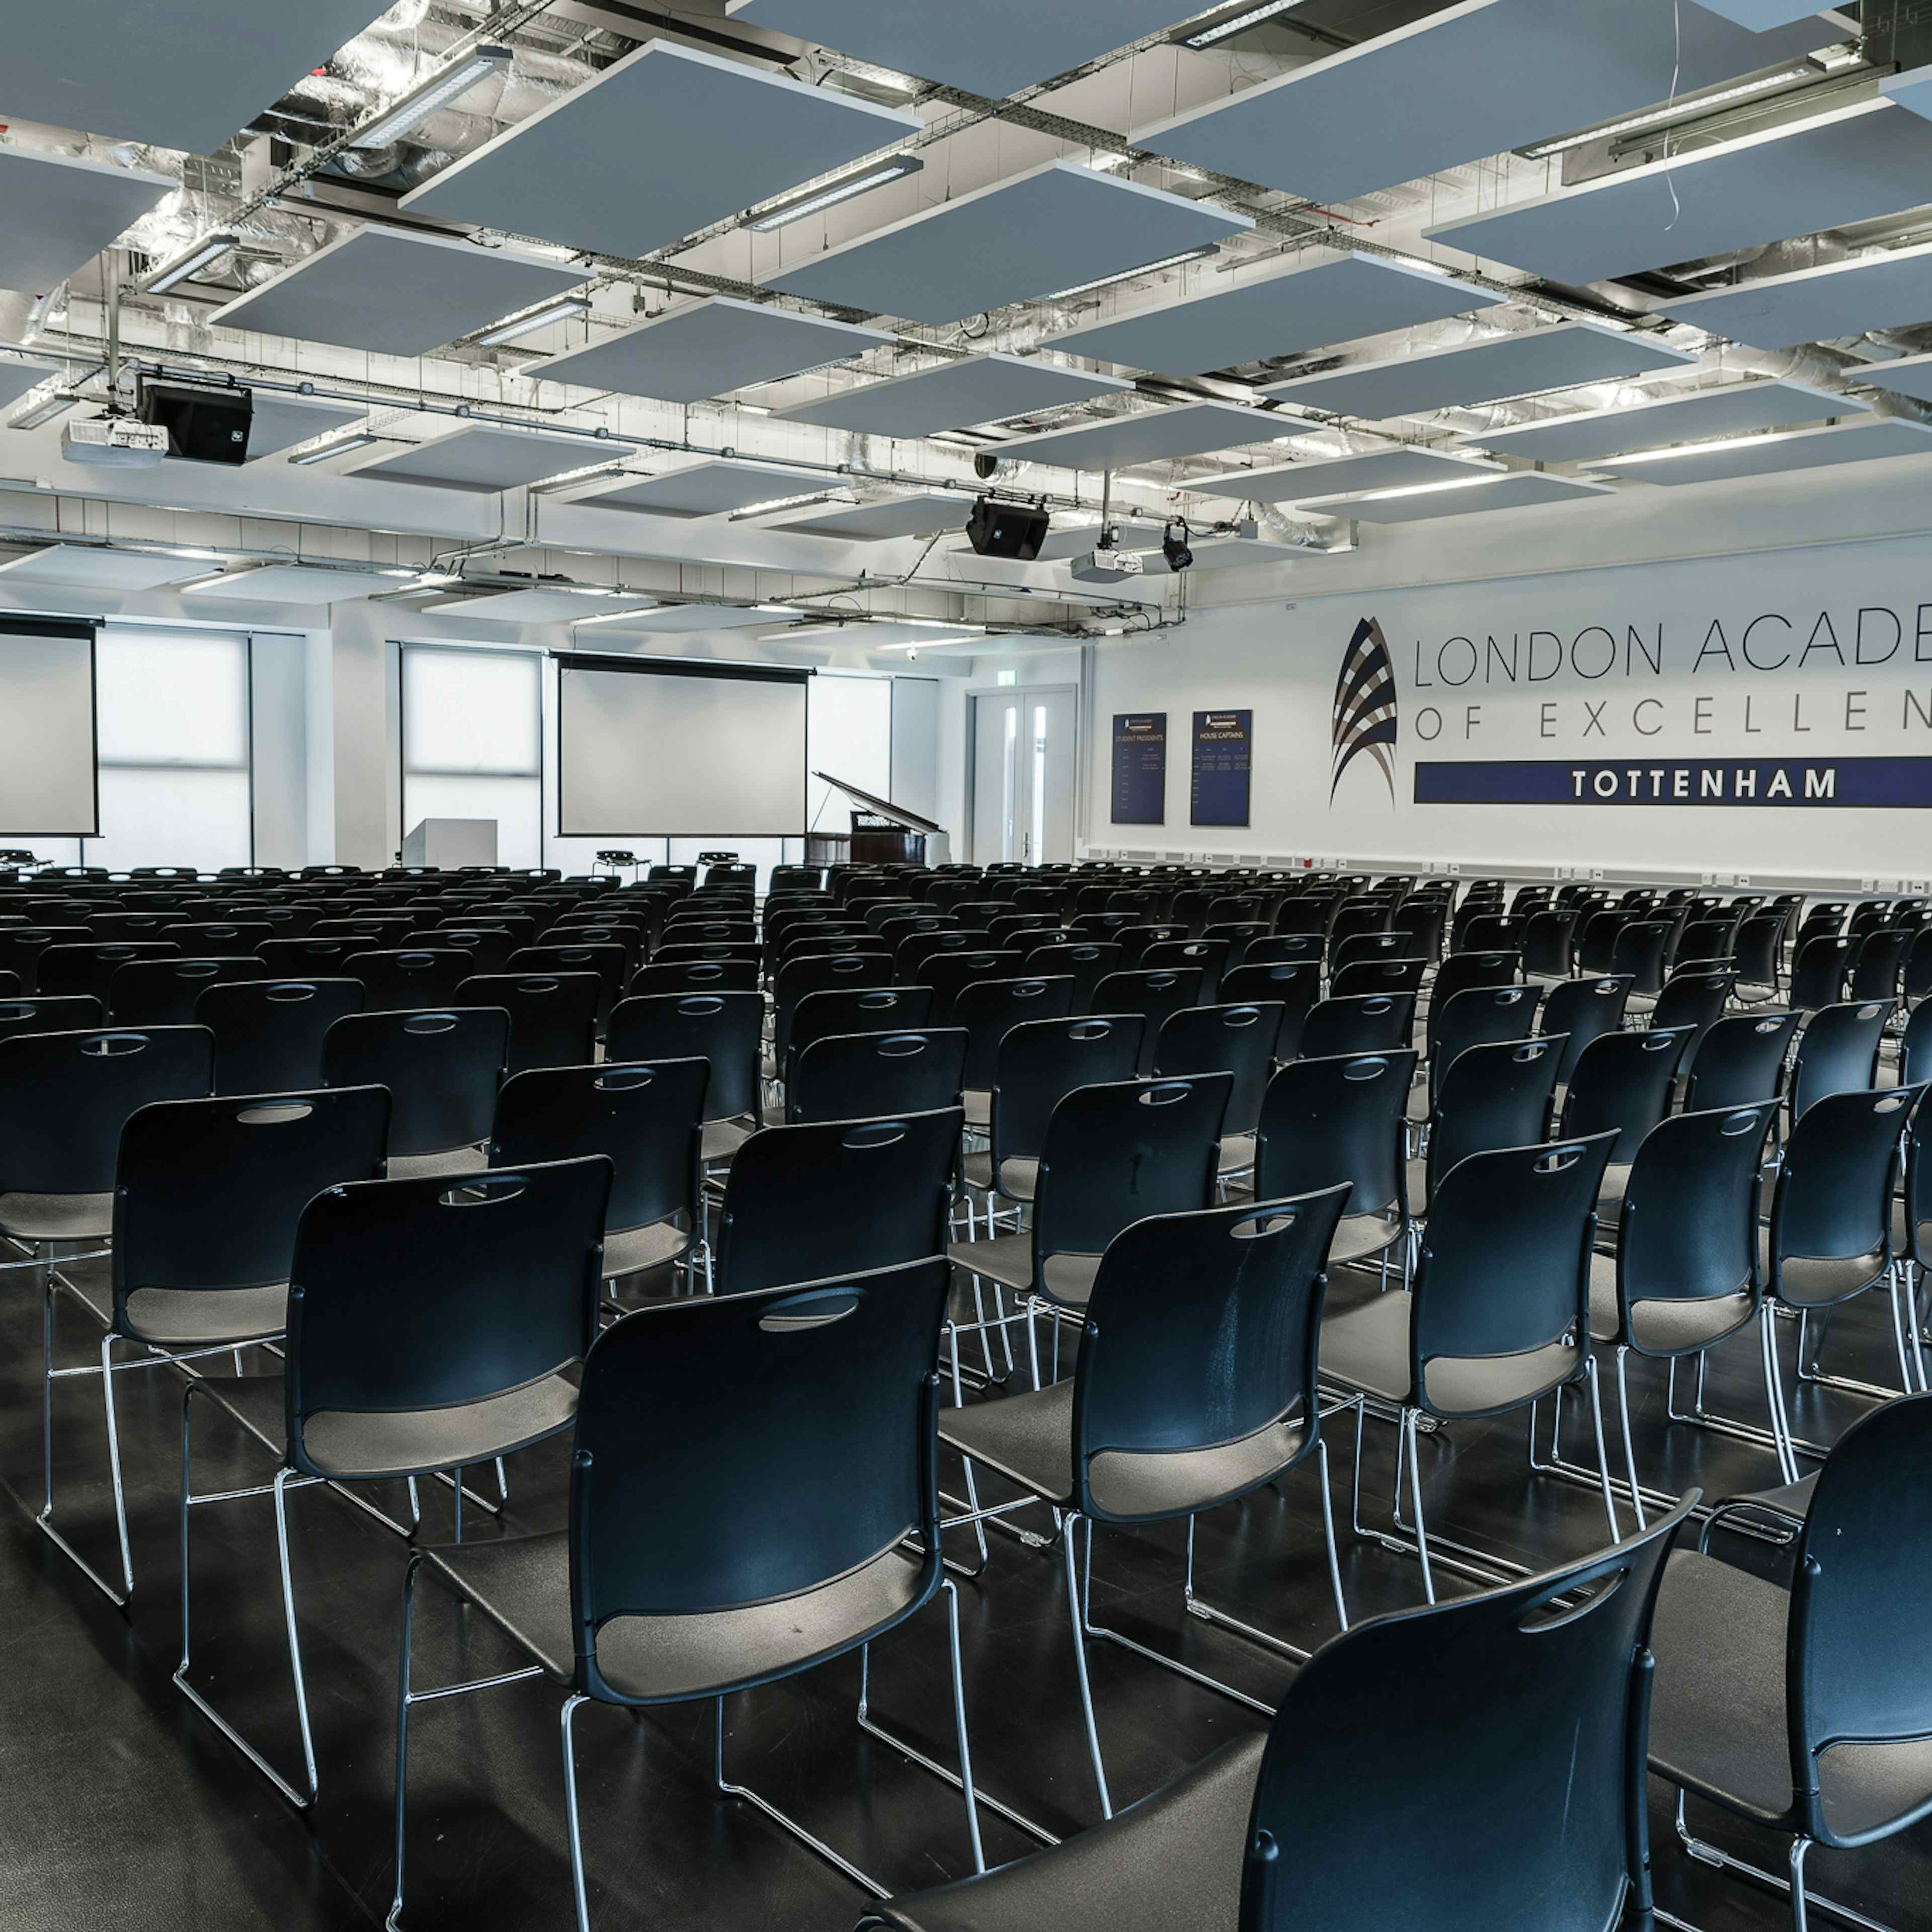 London Academy of Excellence Tottenham - Main hall image 2